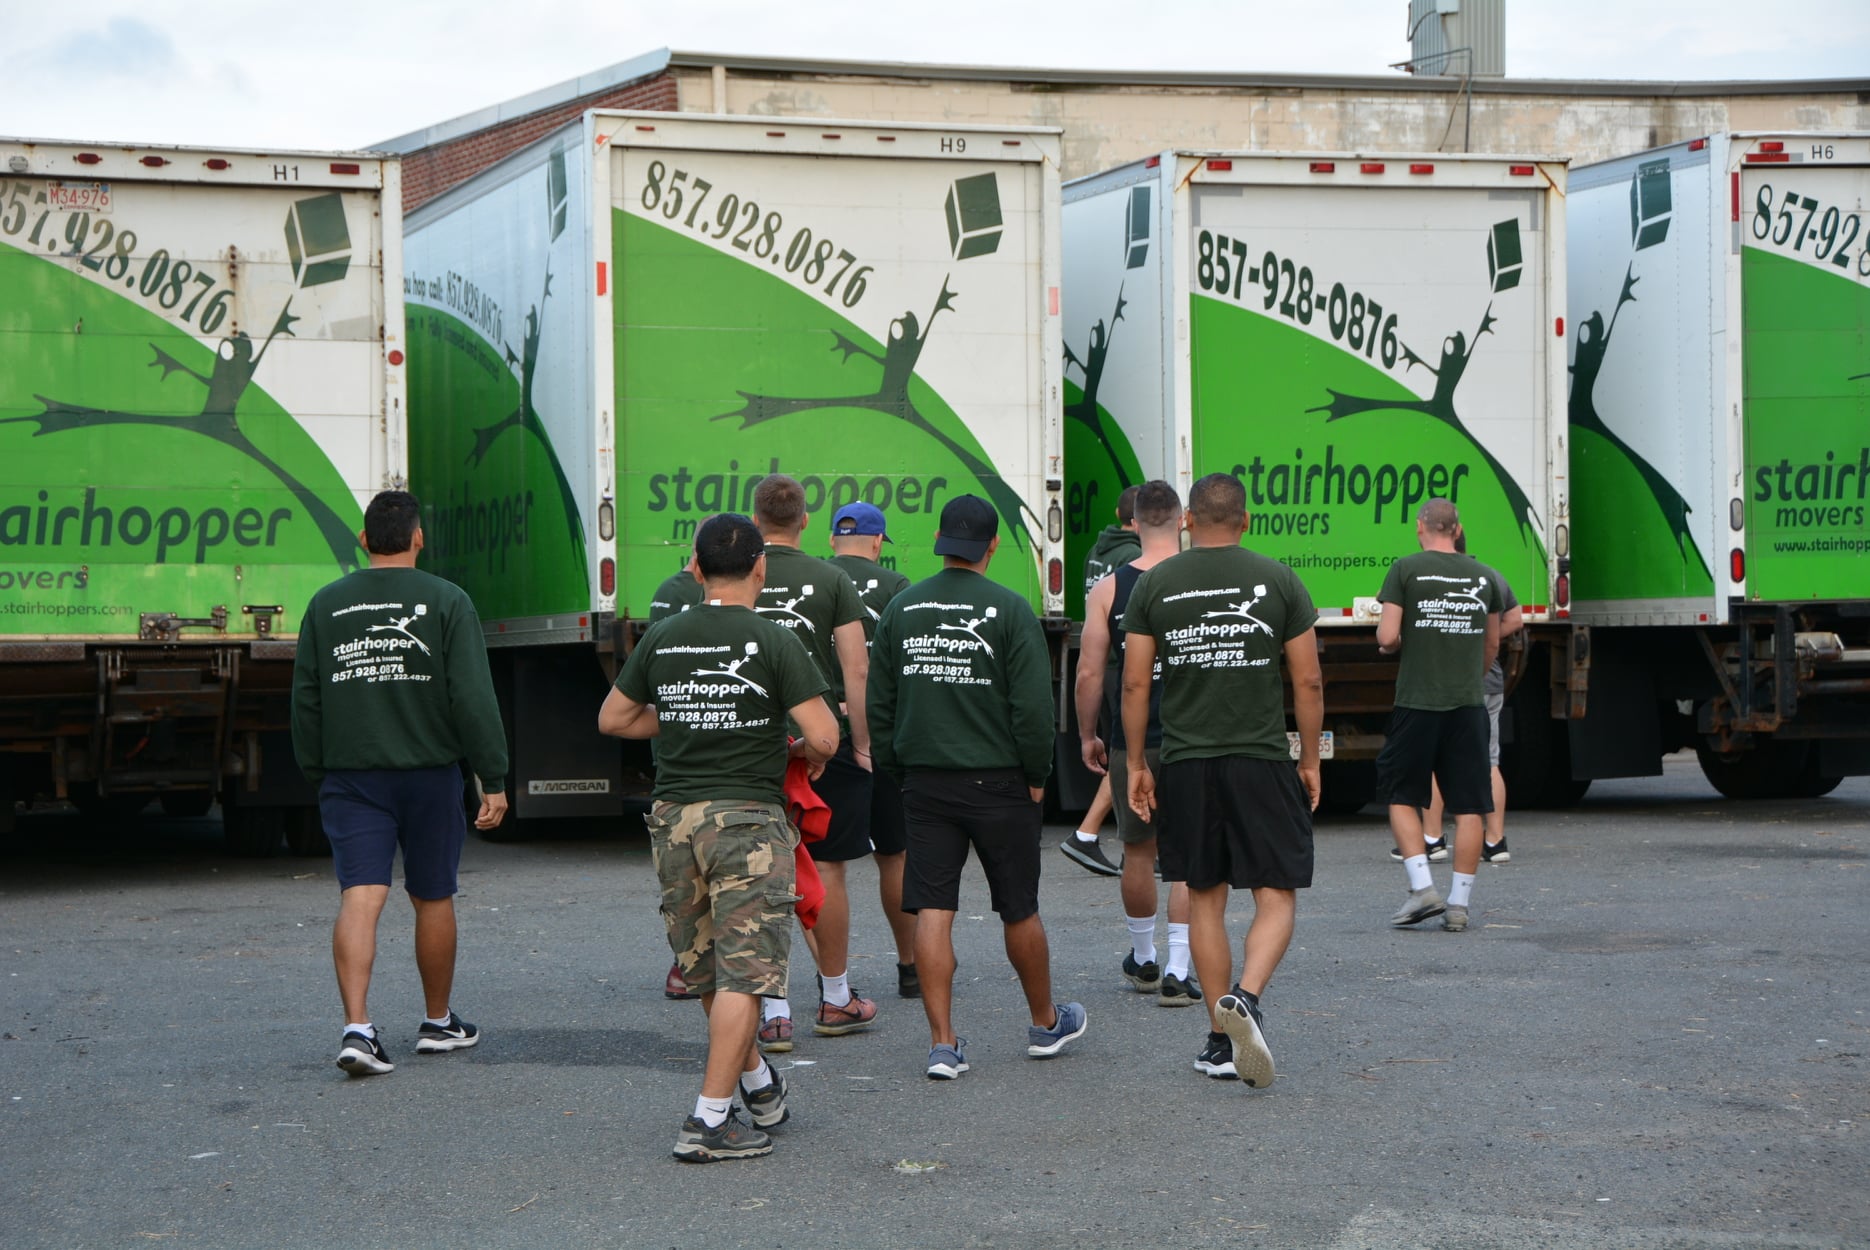 Cheap Movers Boston.jpg At Boston Moving Company, our professional teams of movers provide best local,  moving services at cheap price in Boston. Visit Us Now! https://stairhoppers.com/
 by StairhoppersMovers